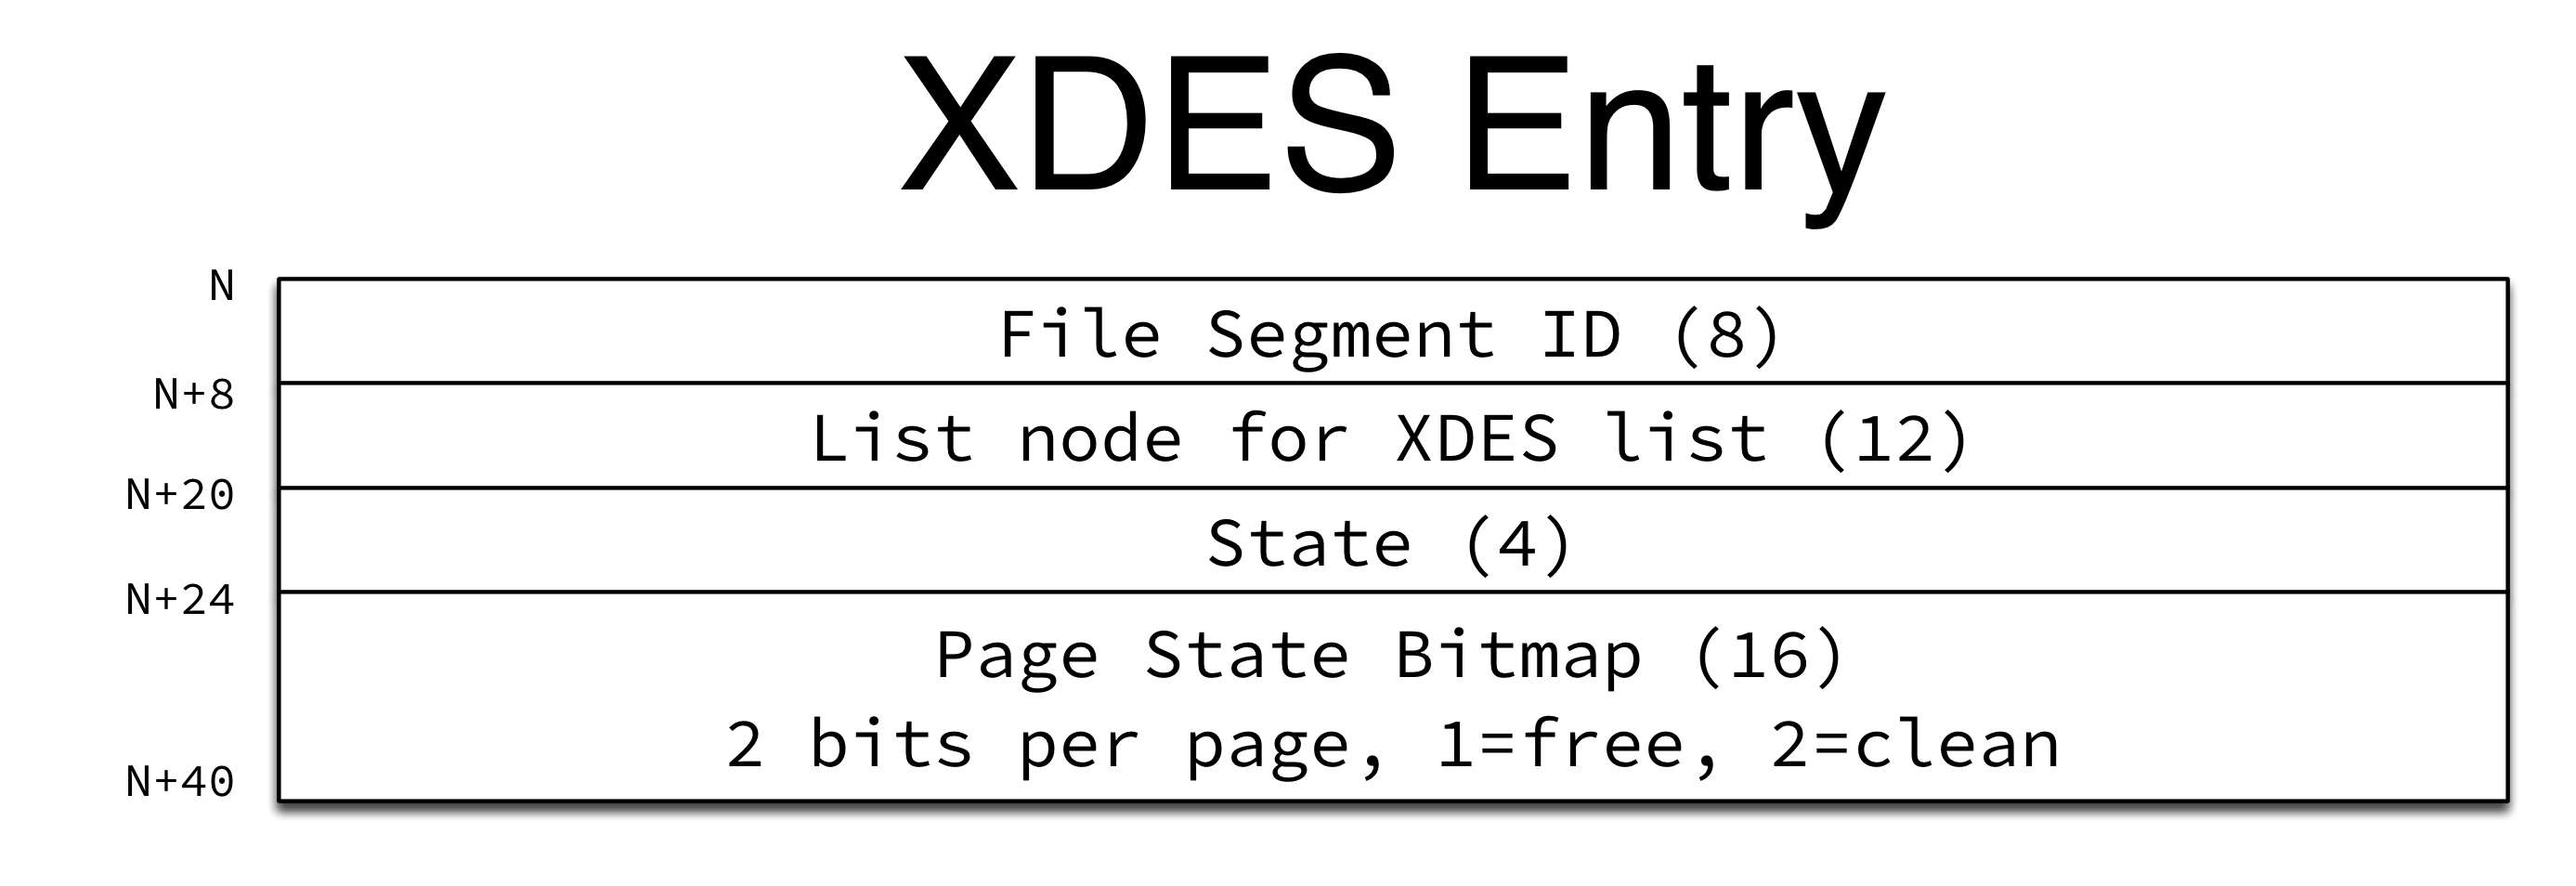 XDES Entry